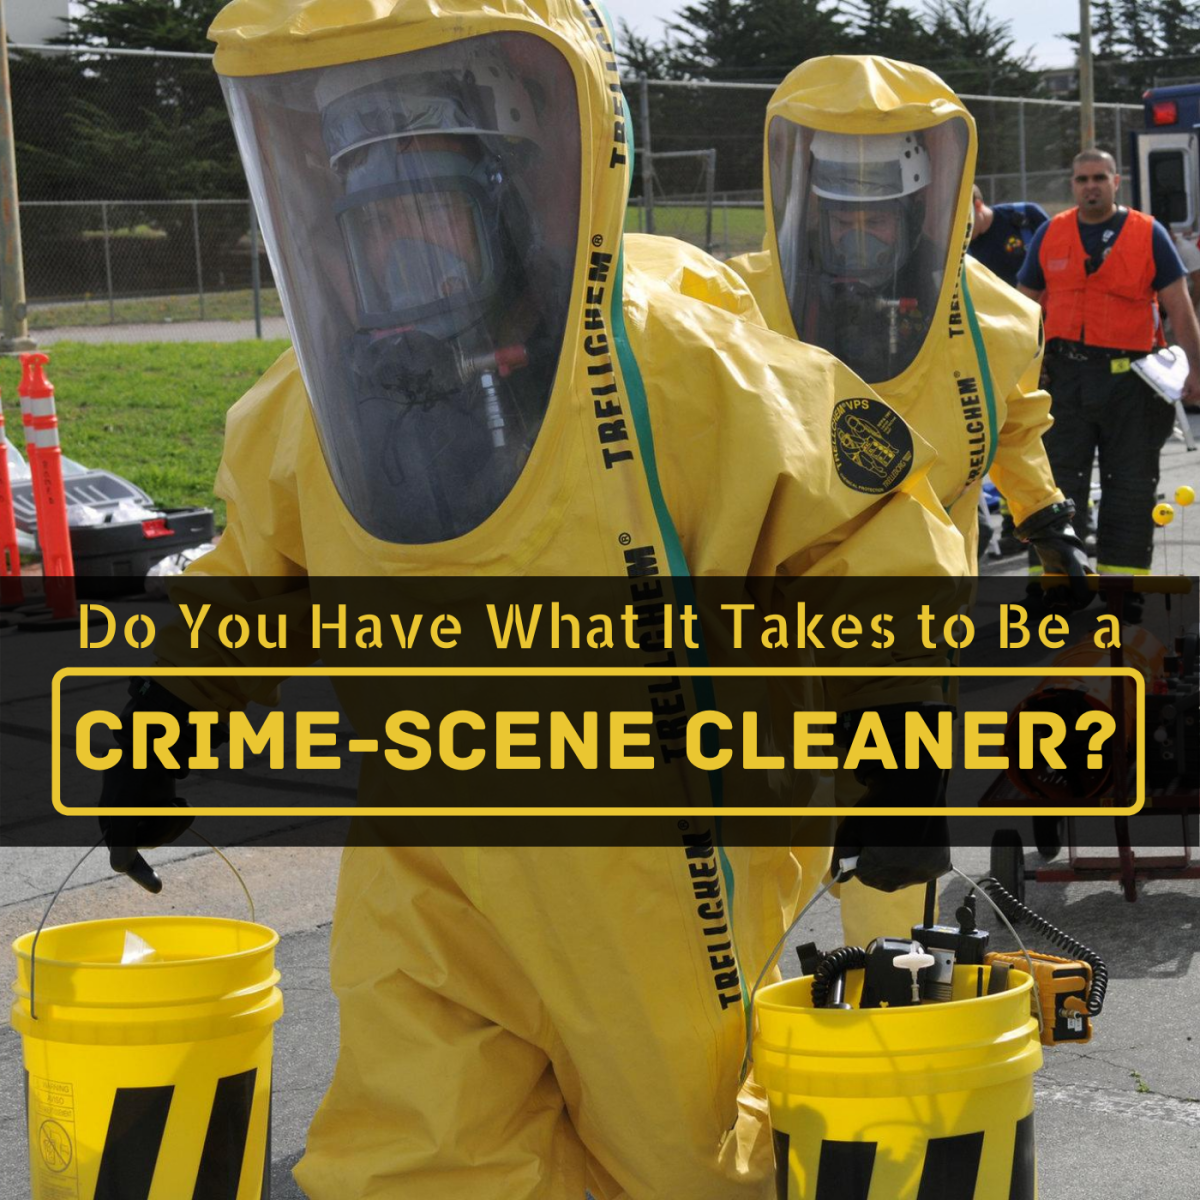 Once investigations are complete, sanitization professionals are often hired to decontaminate crime scenes.